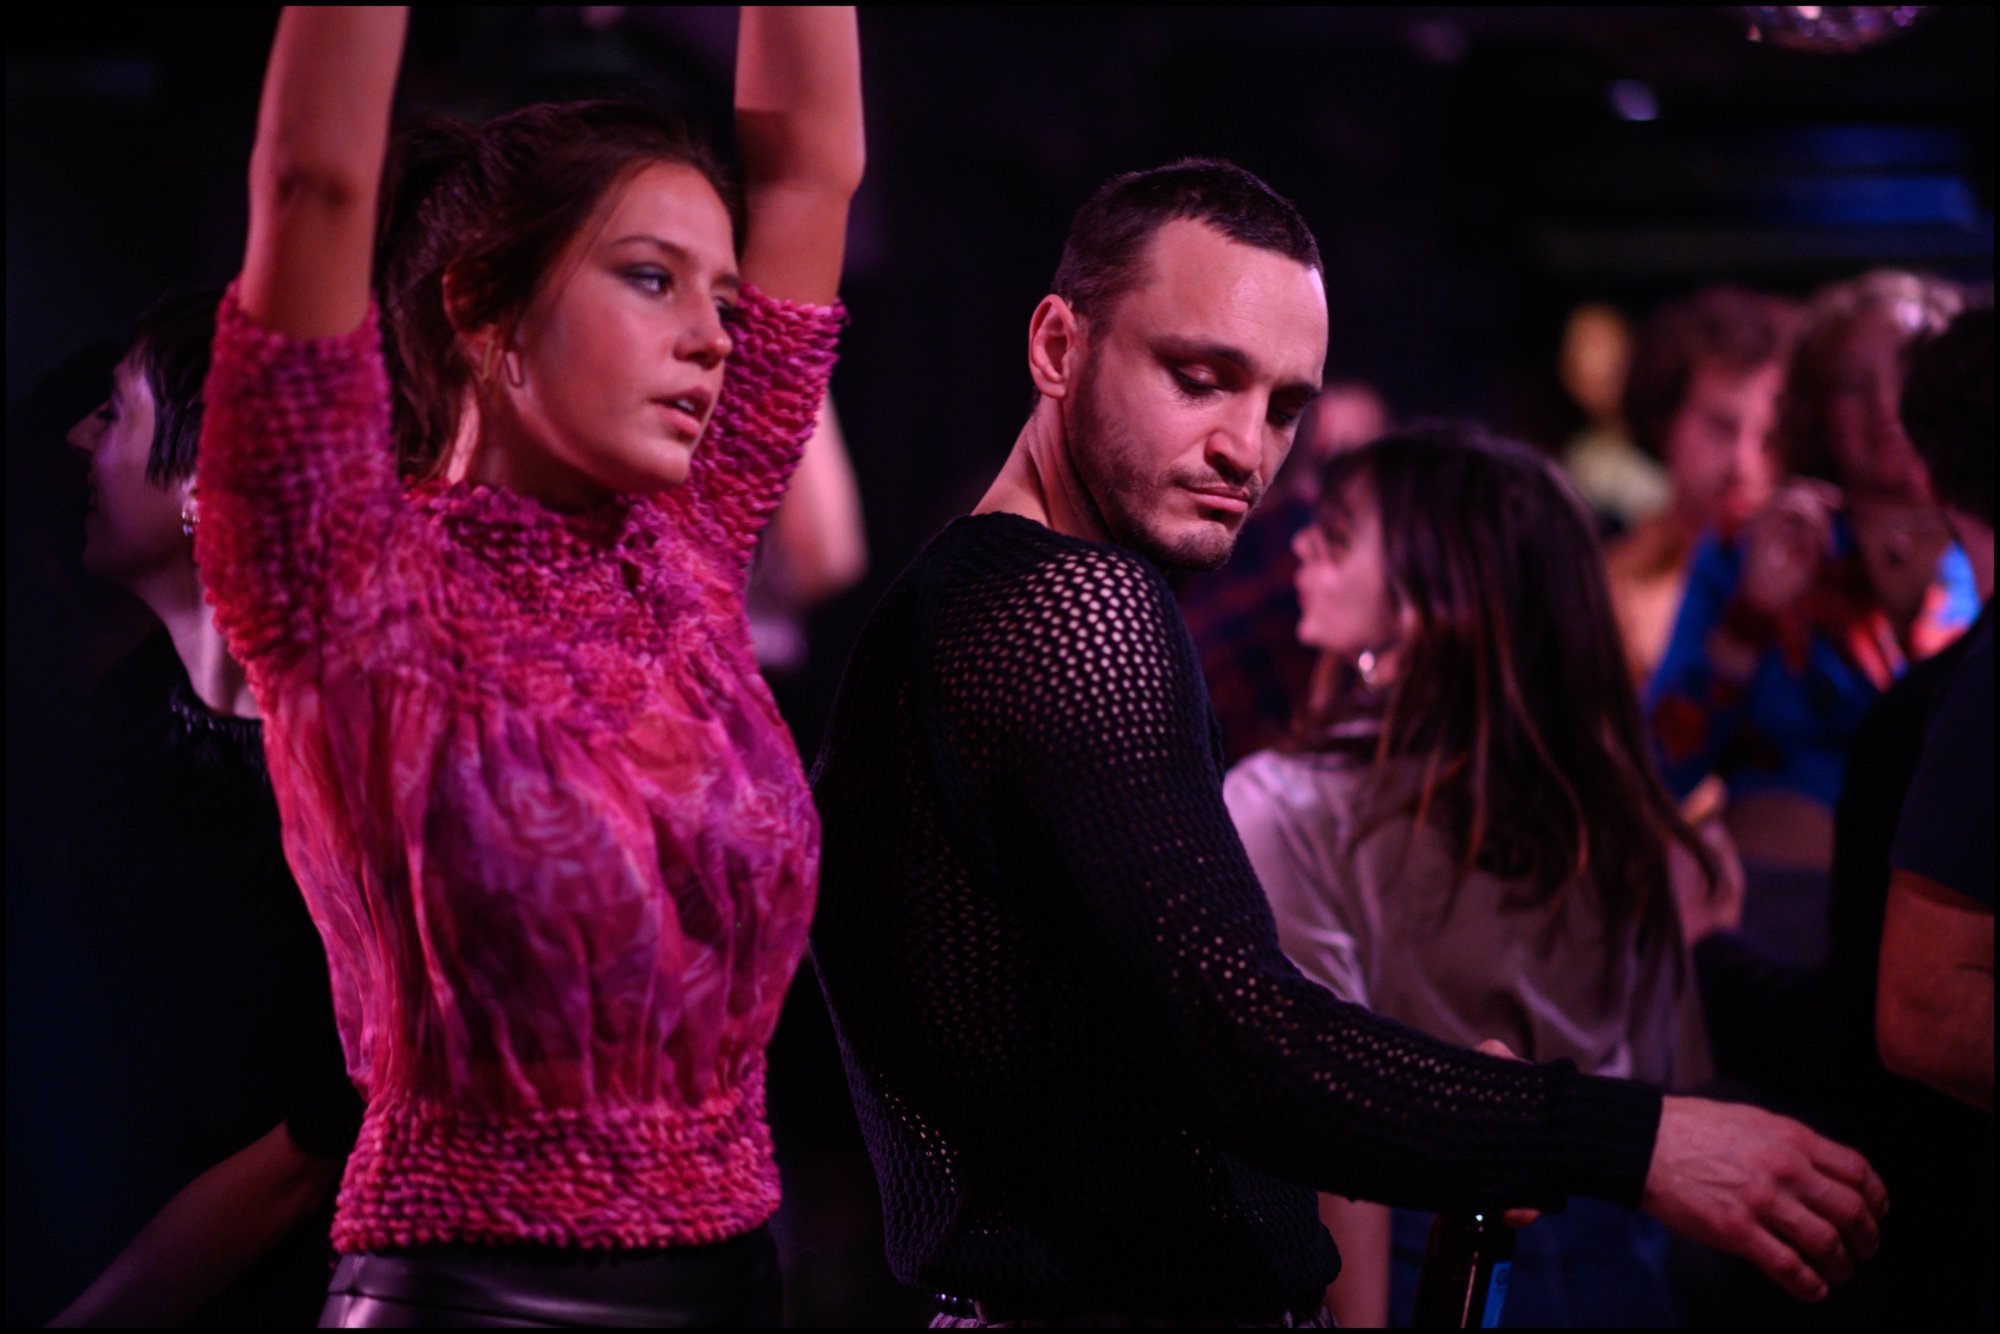 'Passages' Adèle Exarchopoulos as Agathe and Franz Rogowski as Tomas dancing next to each other in a crowd of people